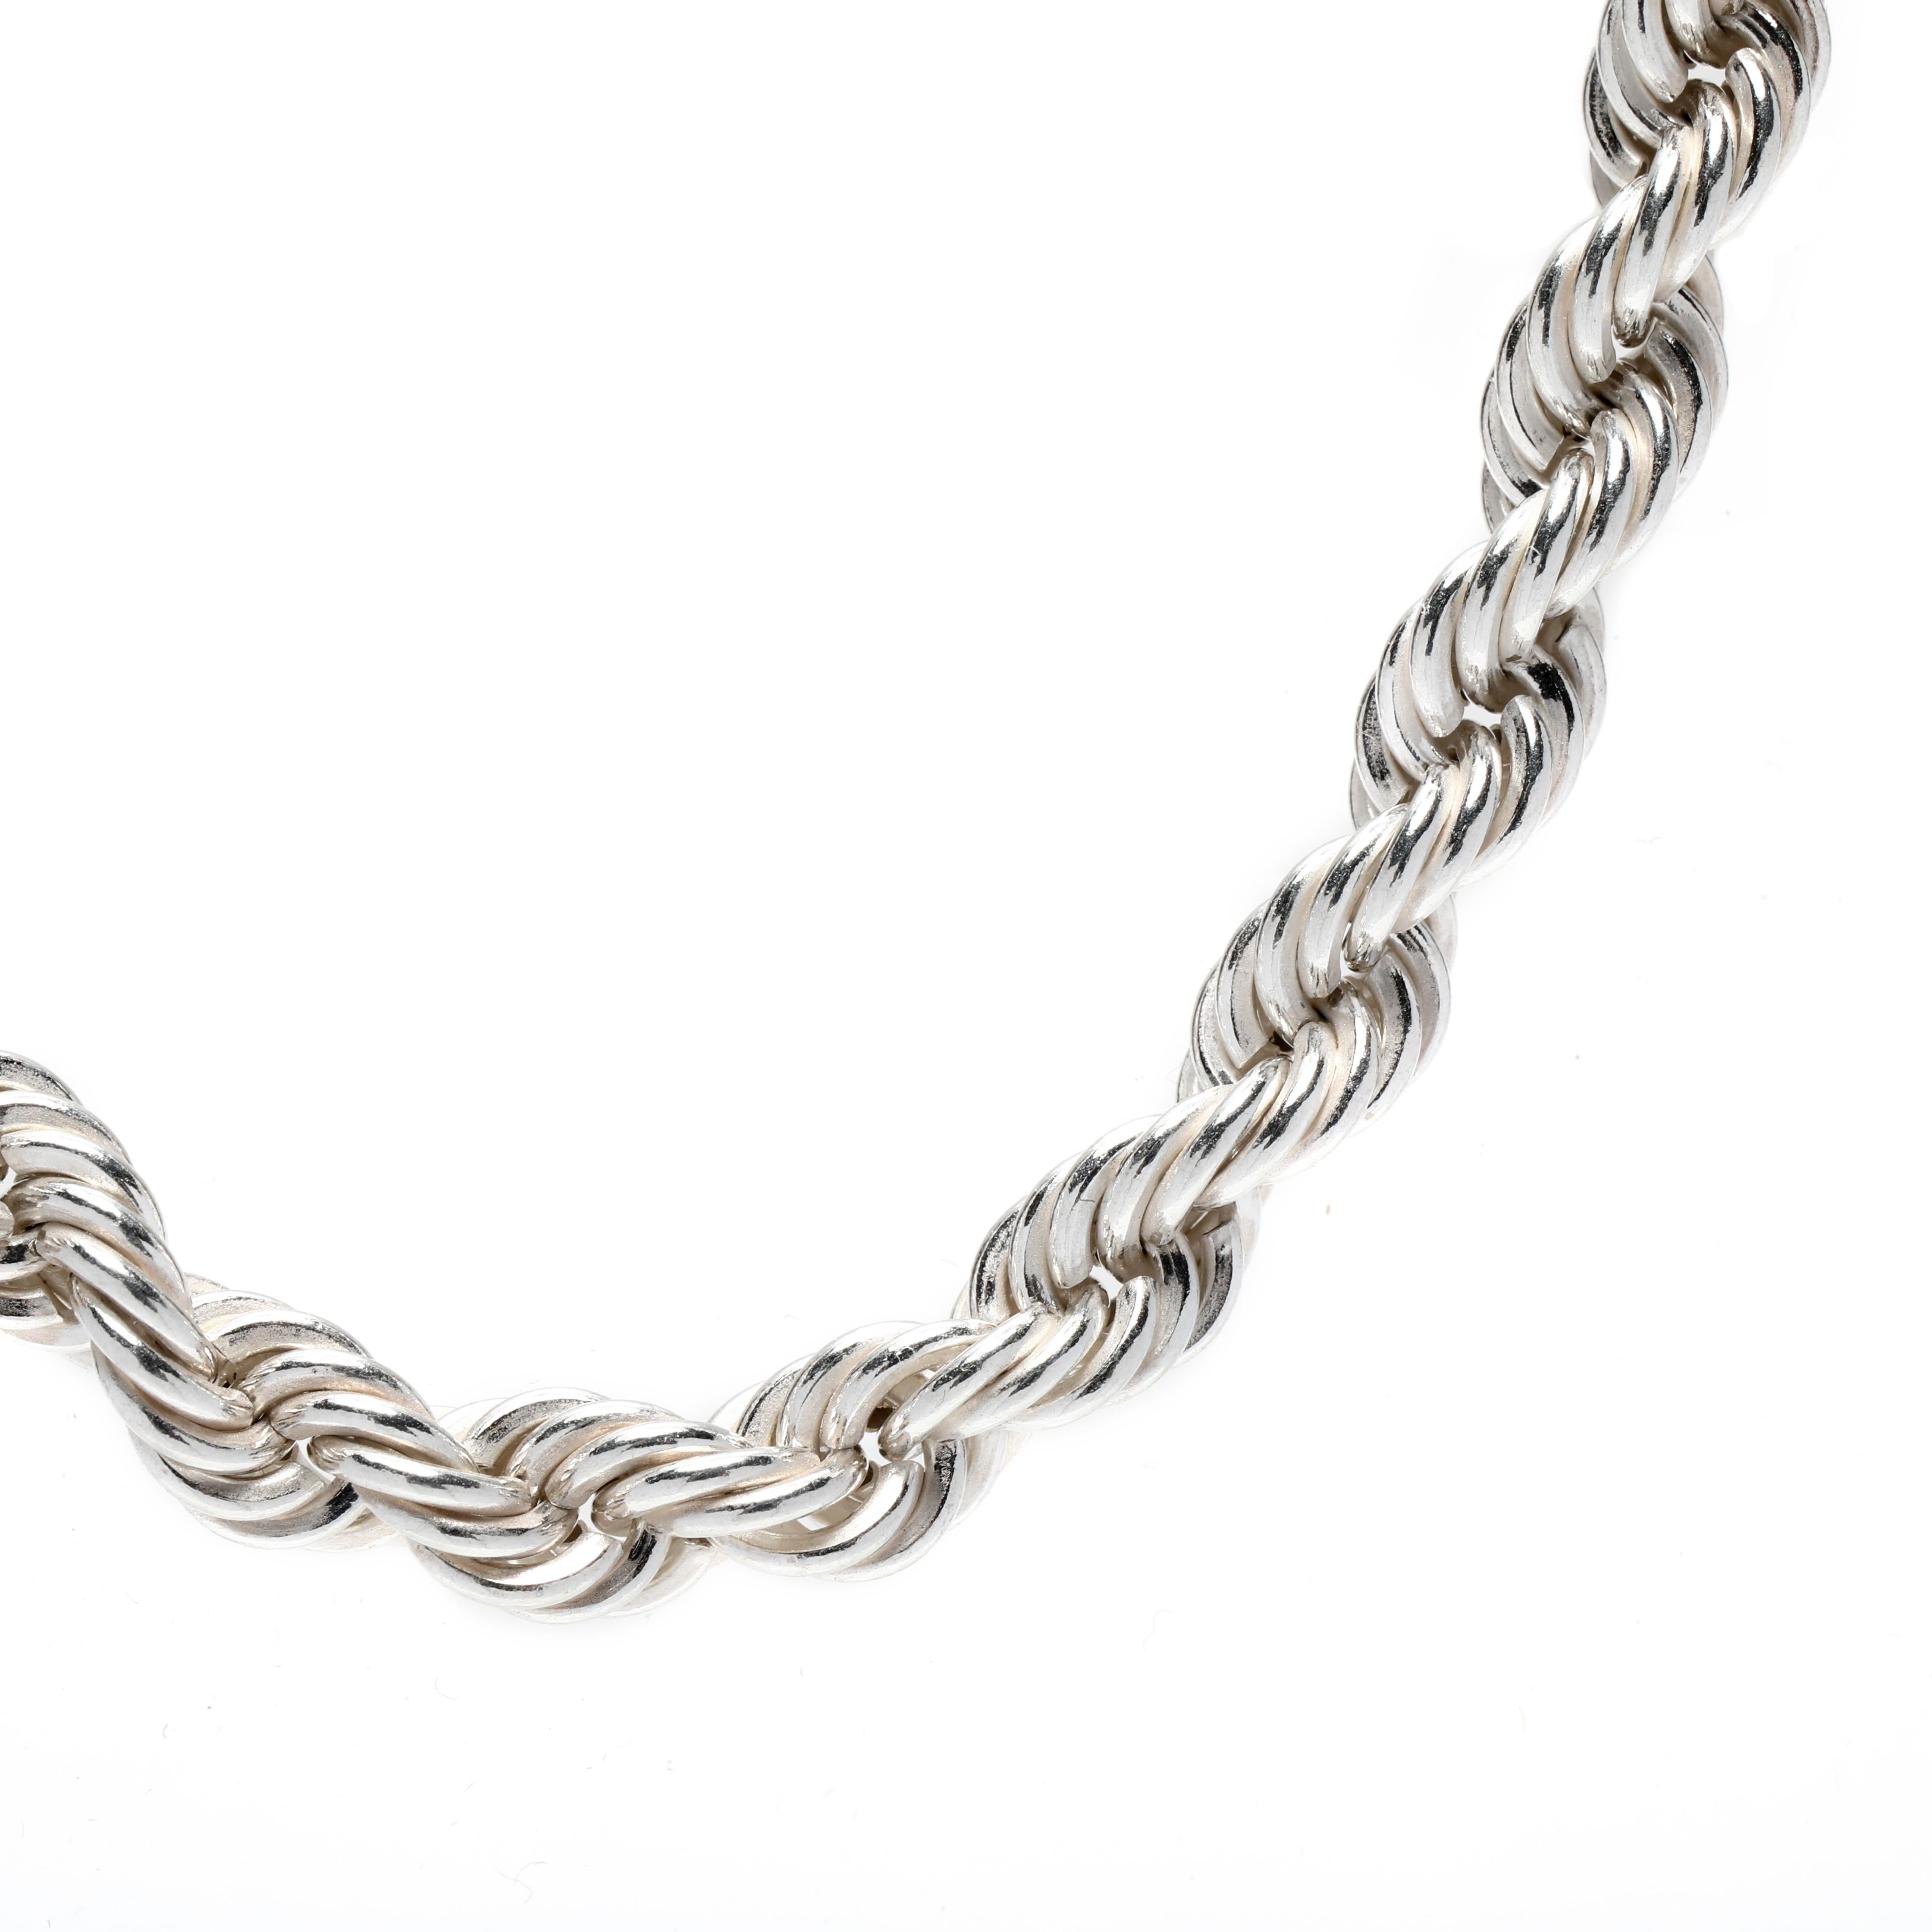 This stunning Rhodium Plated Sterling Silver Thick Rope Chain Necklace is the perfect accessory for any outfit. The length of the chain is 18 inches and it features a hollow rope chain with wide link rope chain style. The Rhodium plating gives it a